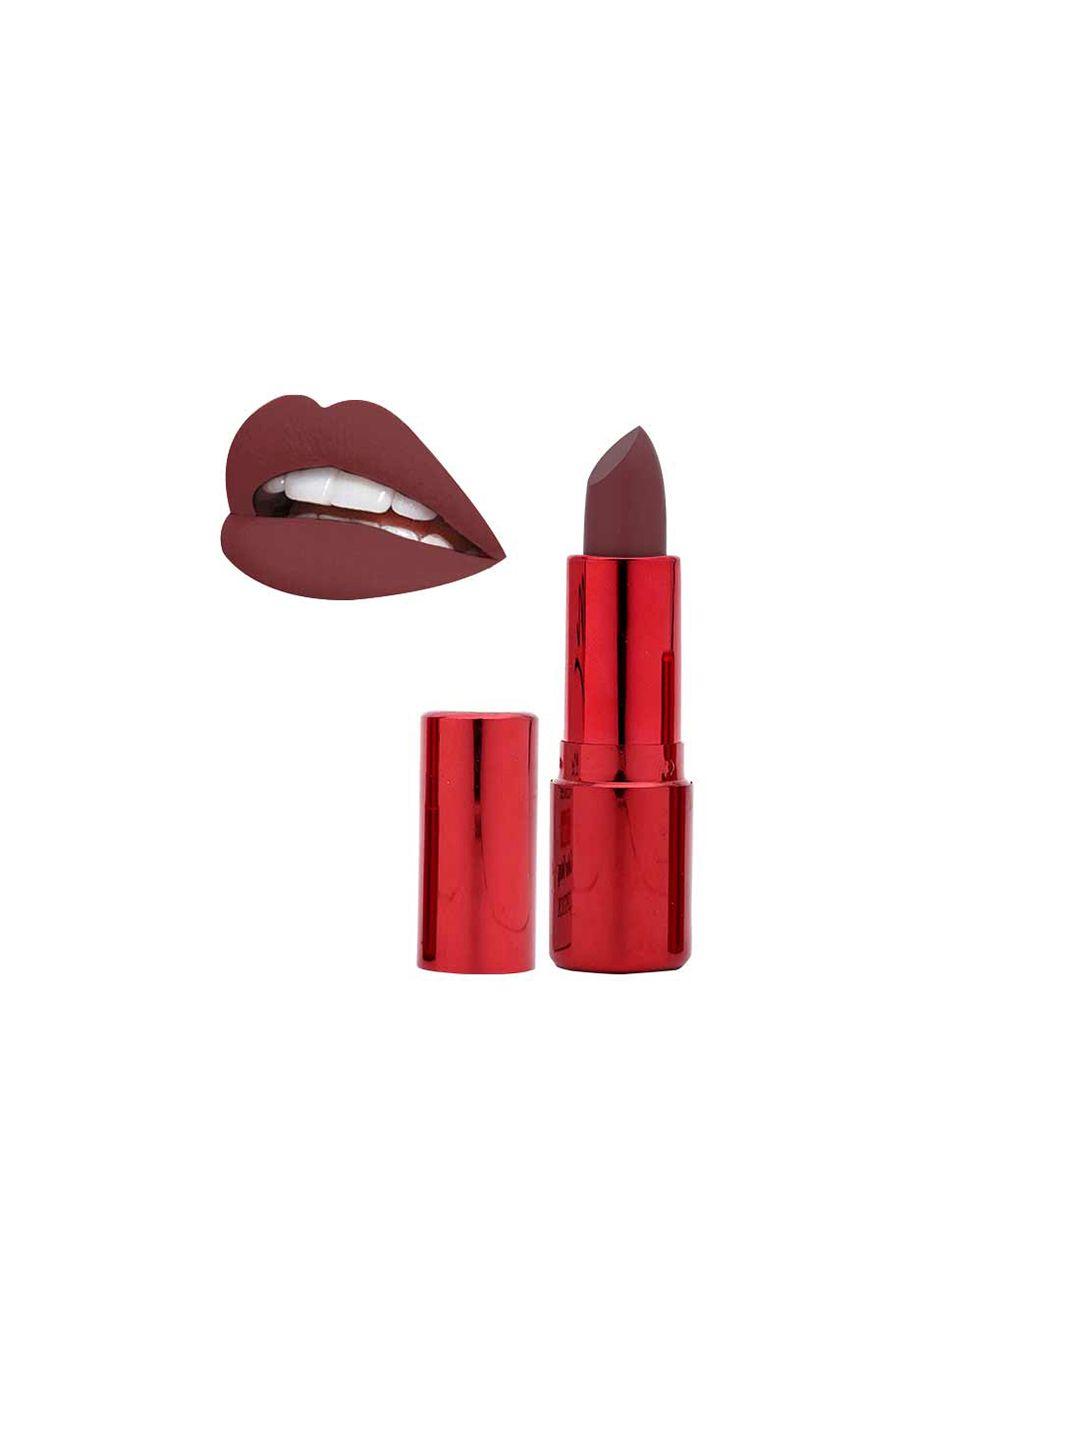 beautyrelay london 12 hour color stay lipstick with vitamin c 3.5g - rosewood